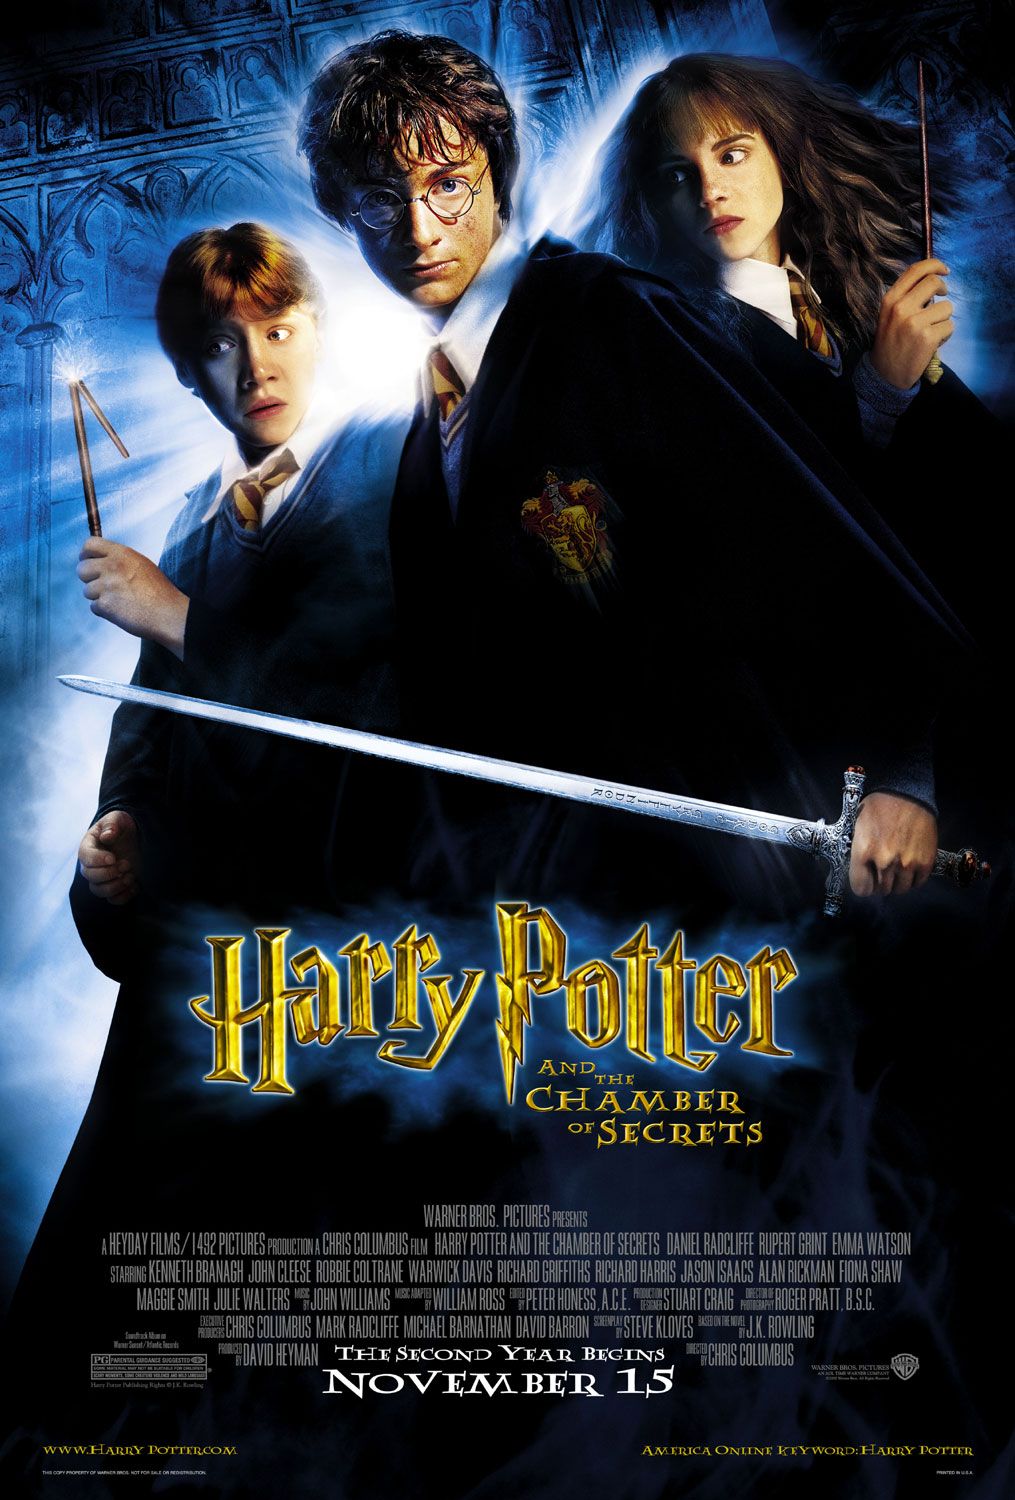 harry potter and the chamber of secrets short summary